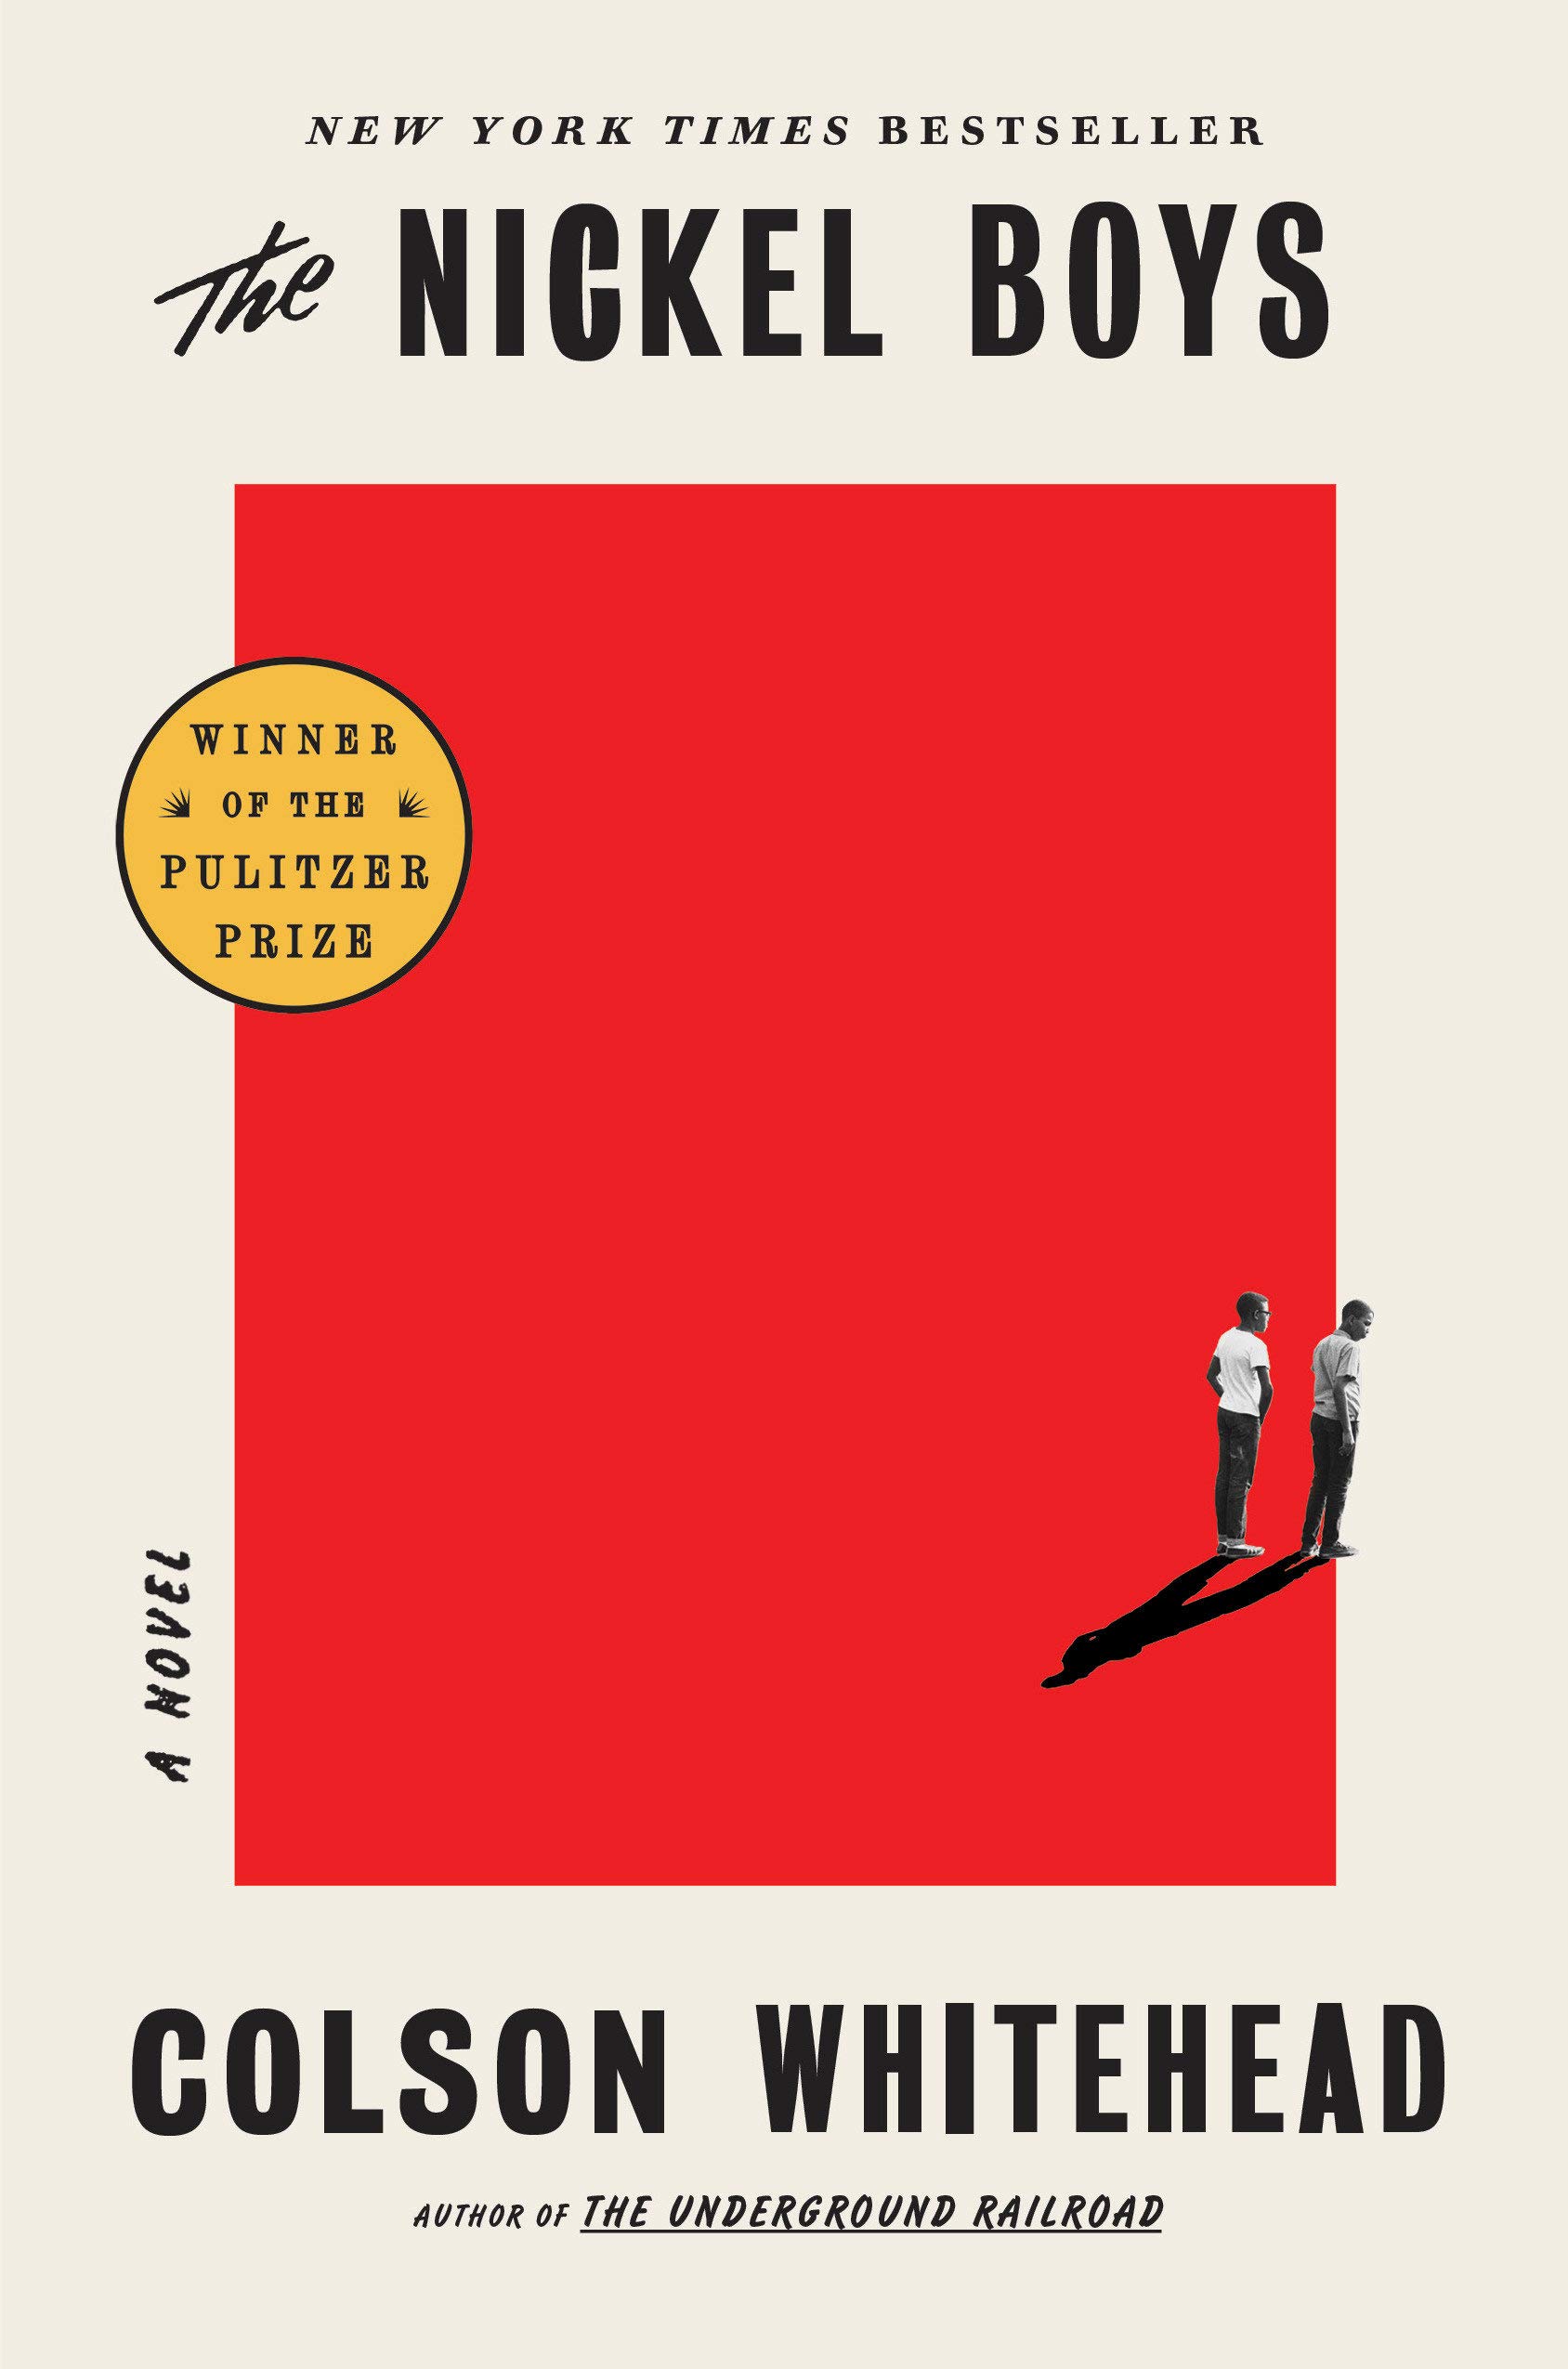 white cover with a large red rectangle and a tiny image of two boys at the edge of the red